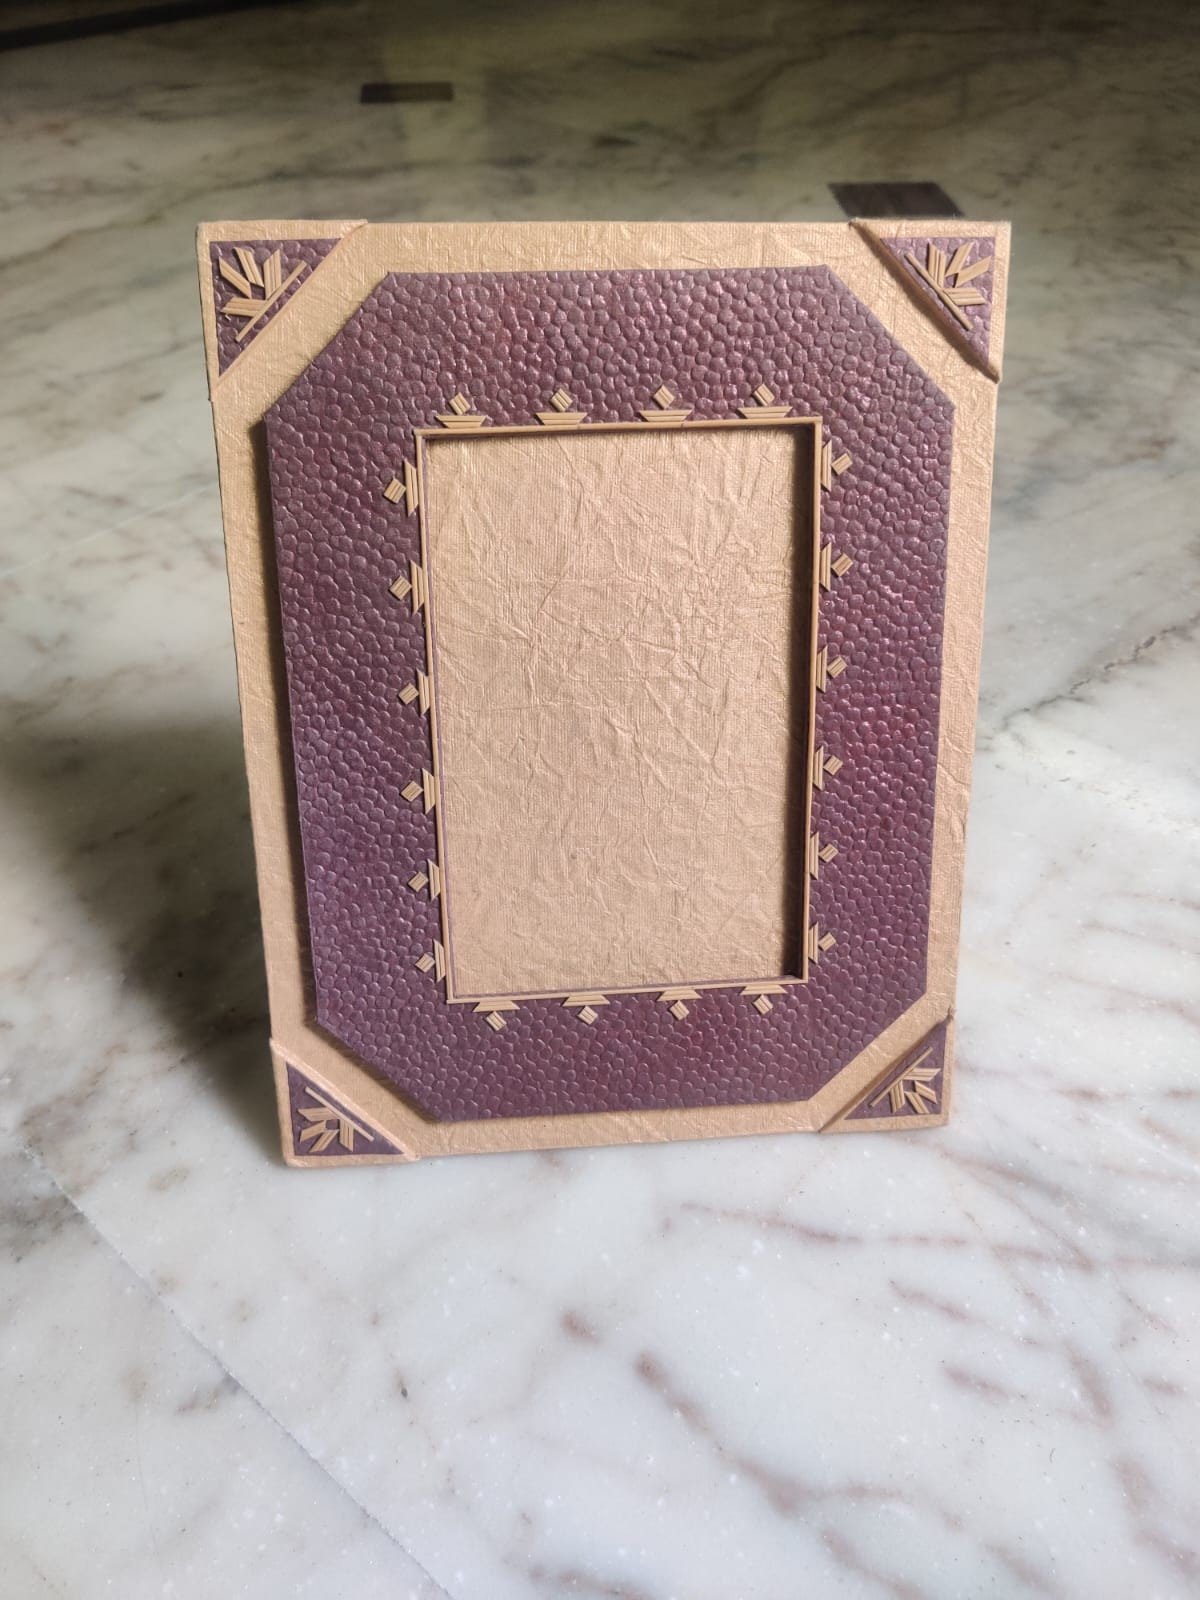 Paper Photo Frames 4x6 Inch 20 PCS DIY Picture Frames Cardboard Frames  Creative Retro Kraft Paper Picture Mats with 20 Wood Clips and 2 Jute Twine